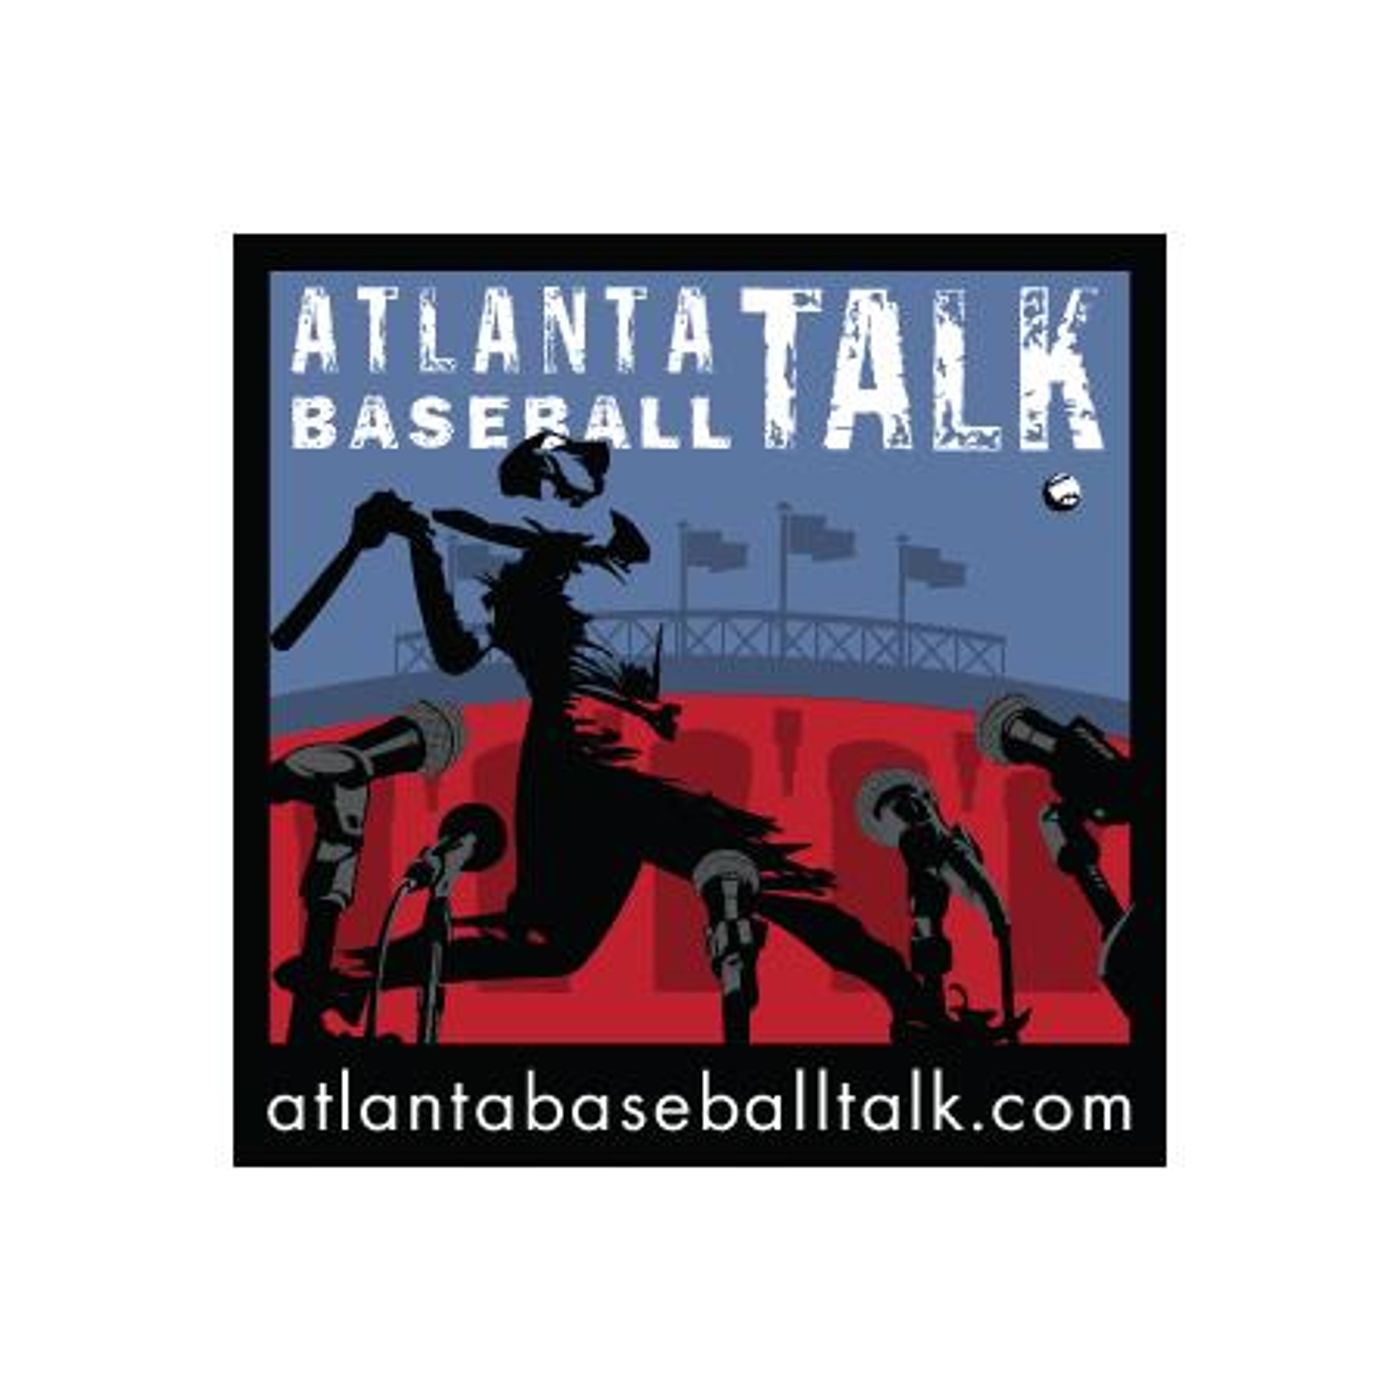 Show #413: Post trade deadline chat with Gabe Burns from AJC